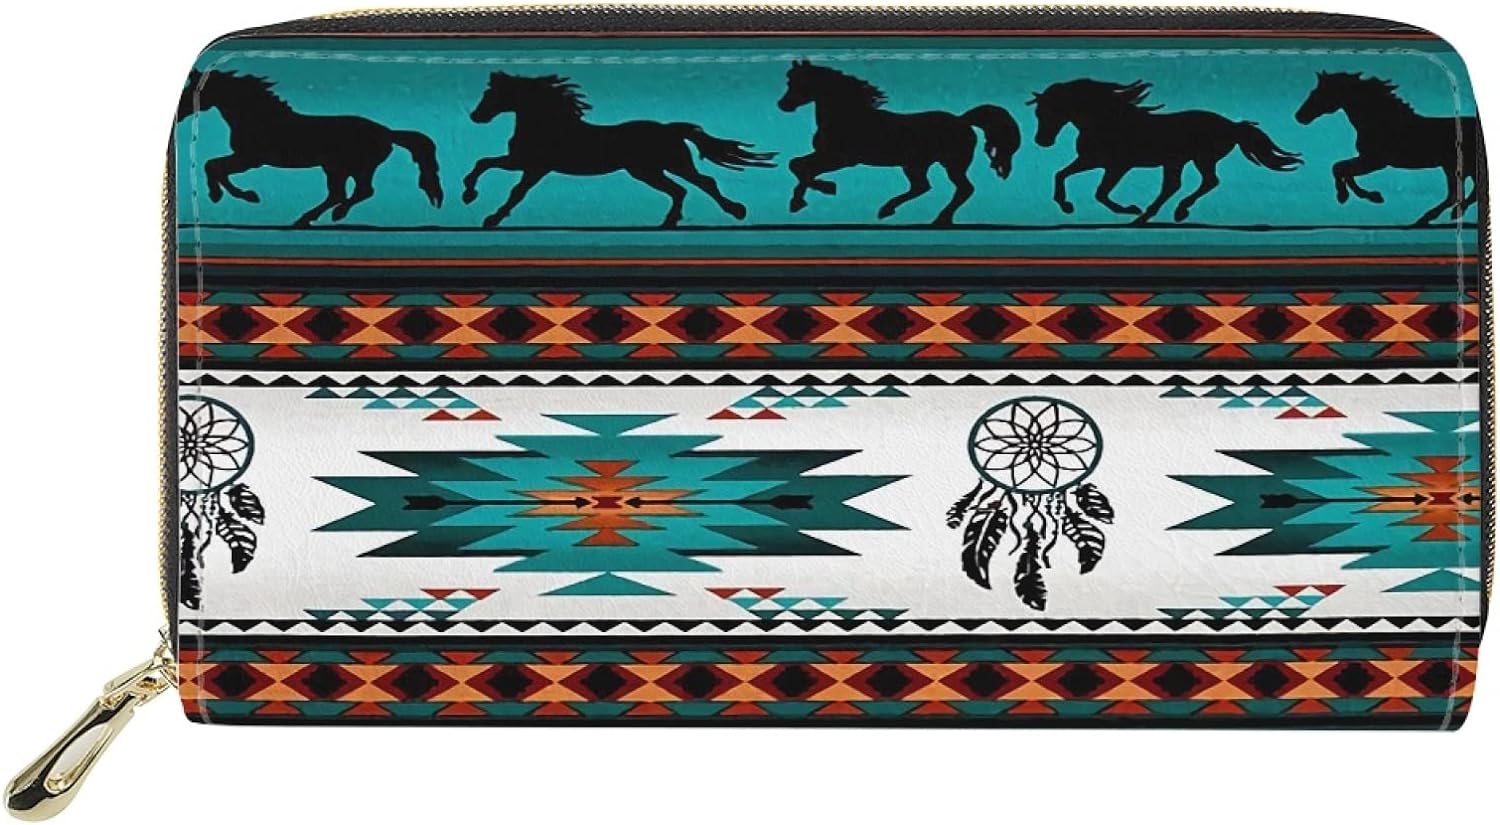 Wanyint Southwest Women Wallet Horse Zipper Around PU Leather Purse Handbag for Lady Girls Native American Couch Blnket Navajo in Green Indian Tribal Cell Phone Pouch ID Card Holder Handbag